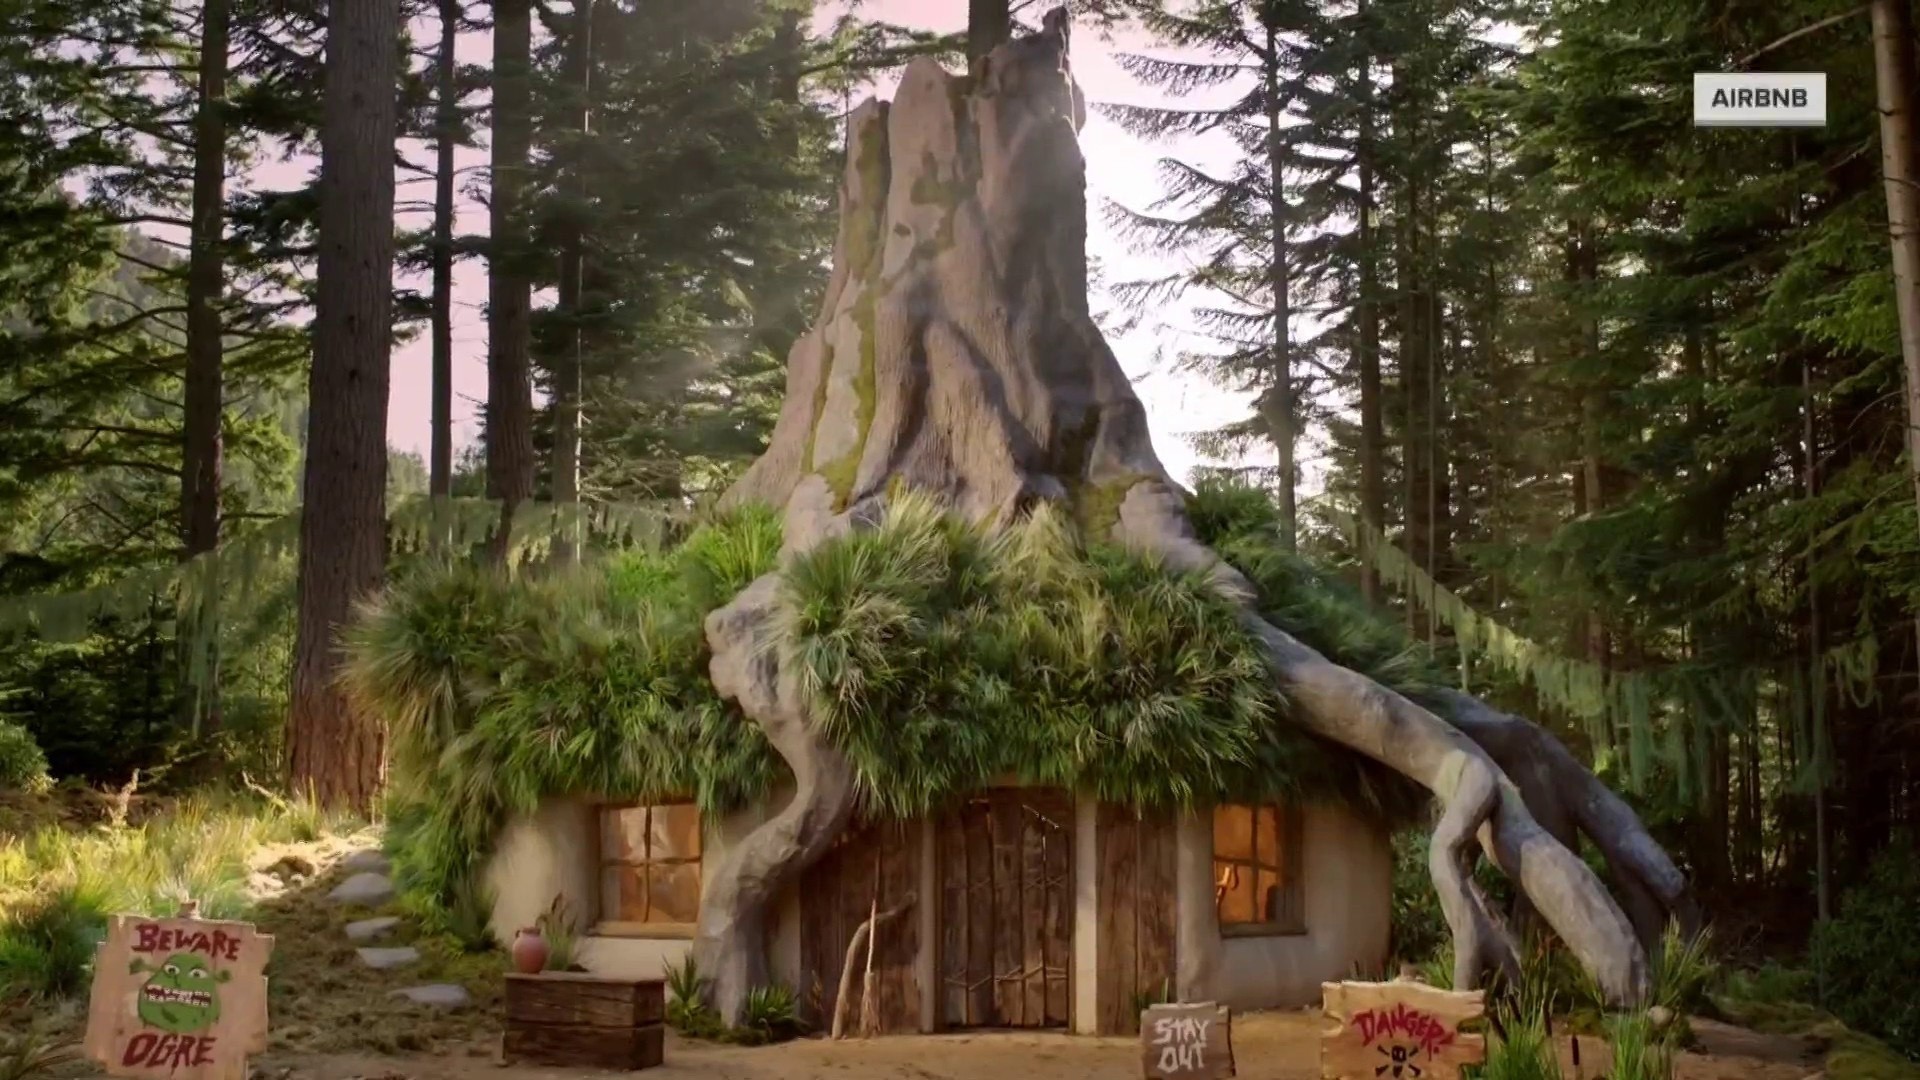 Spend a night in Shrek's swamp! How you can book a stay